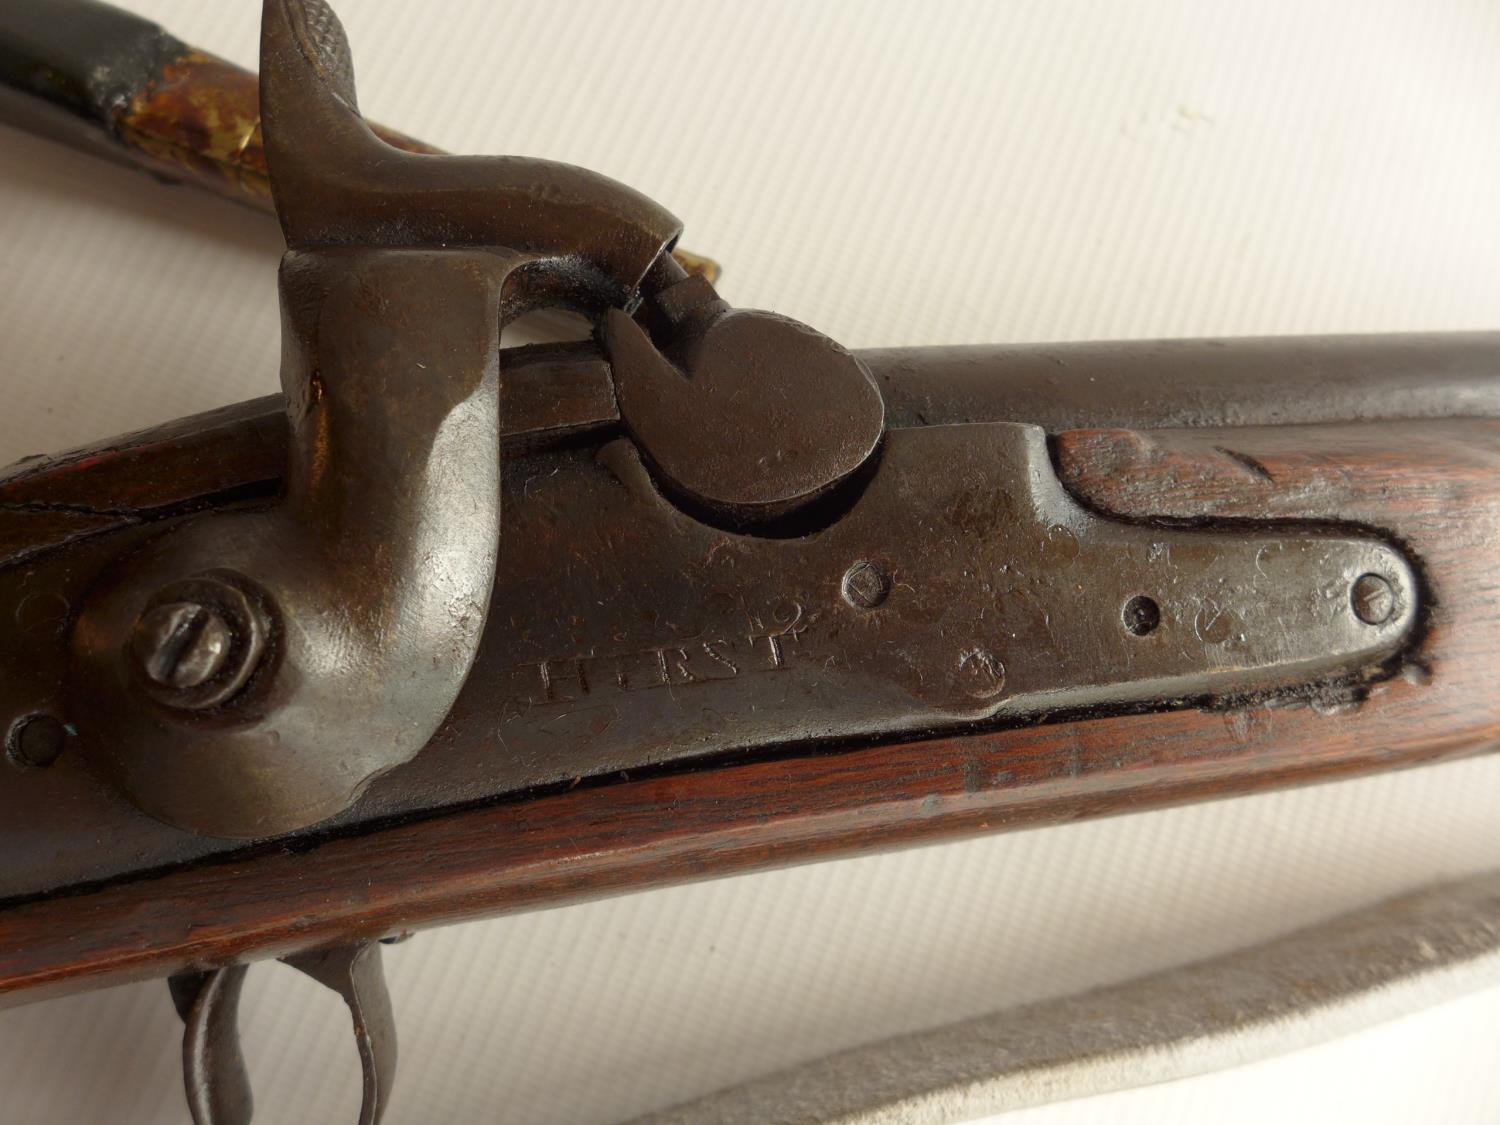 AN EAST INDIA COMPANY PERCUSSION CAP BROWN BESS MUSKET AND BAYONET, LOCK MARKED HURST, LENGTH OF - Image 8 of 11